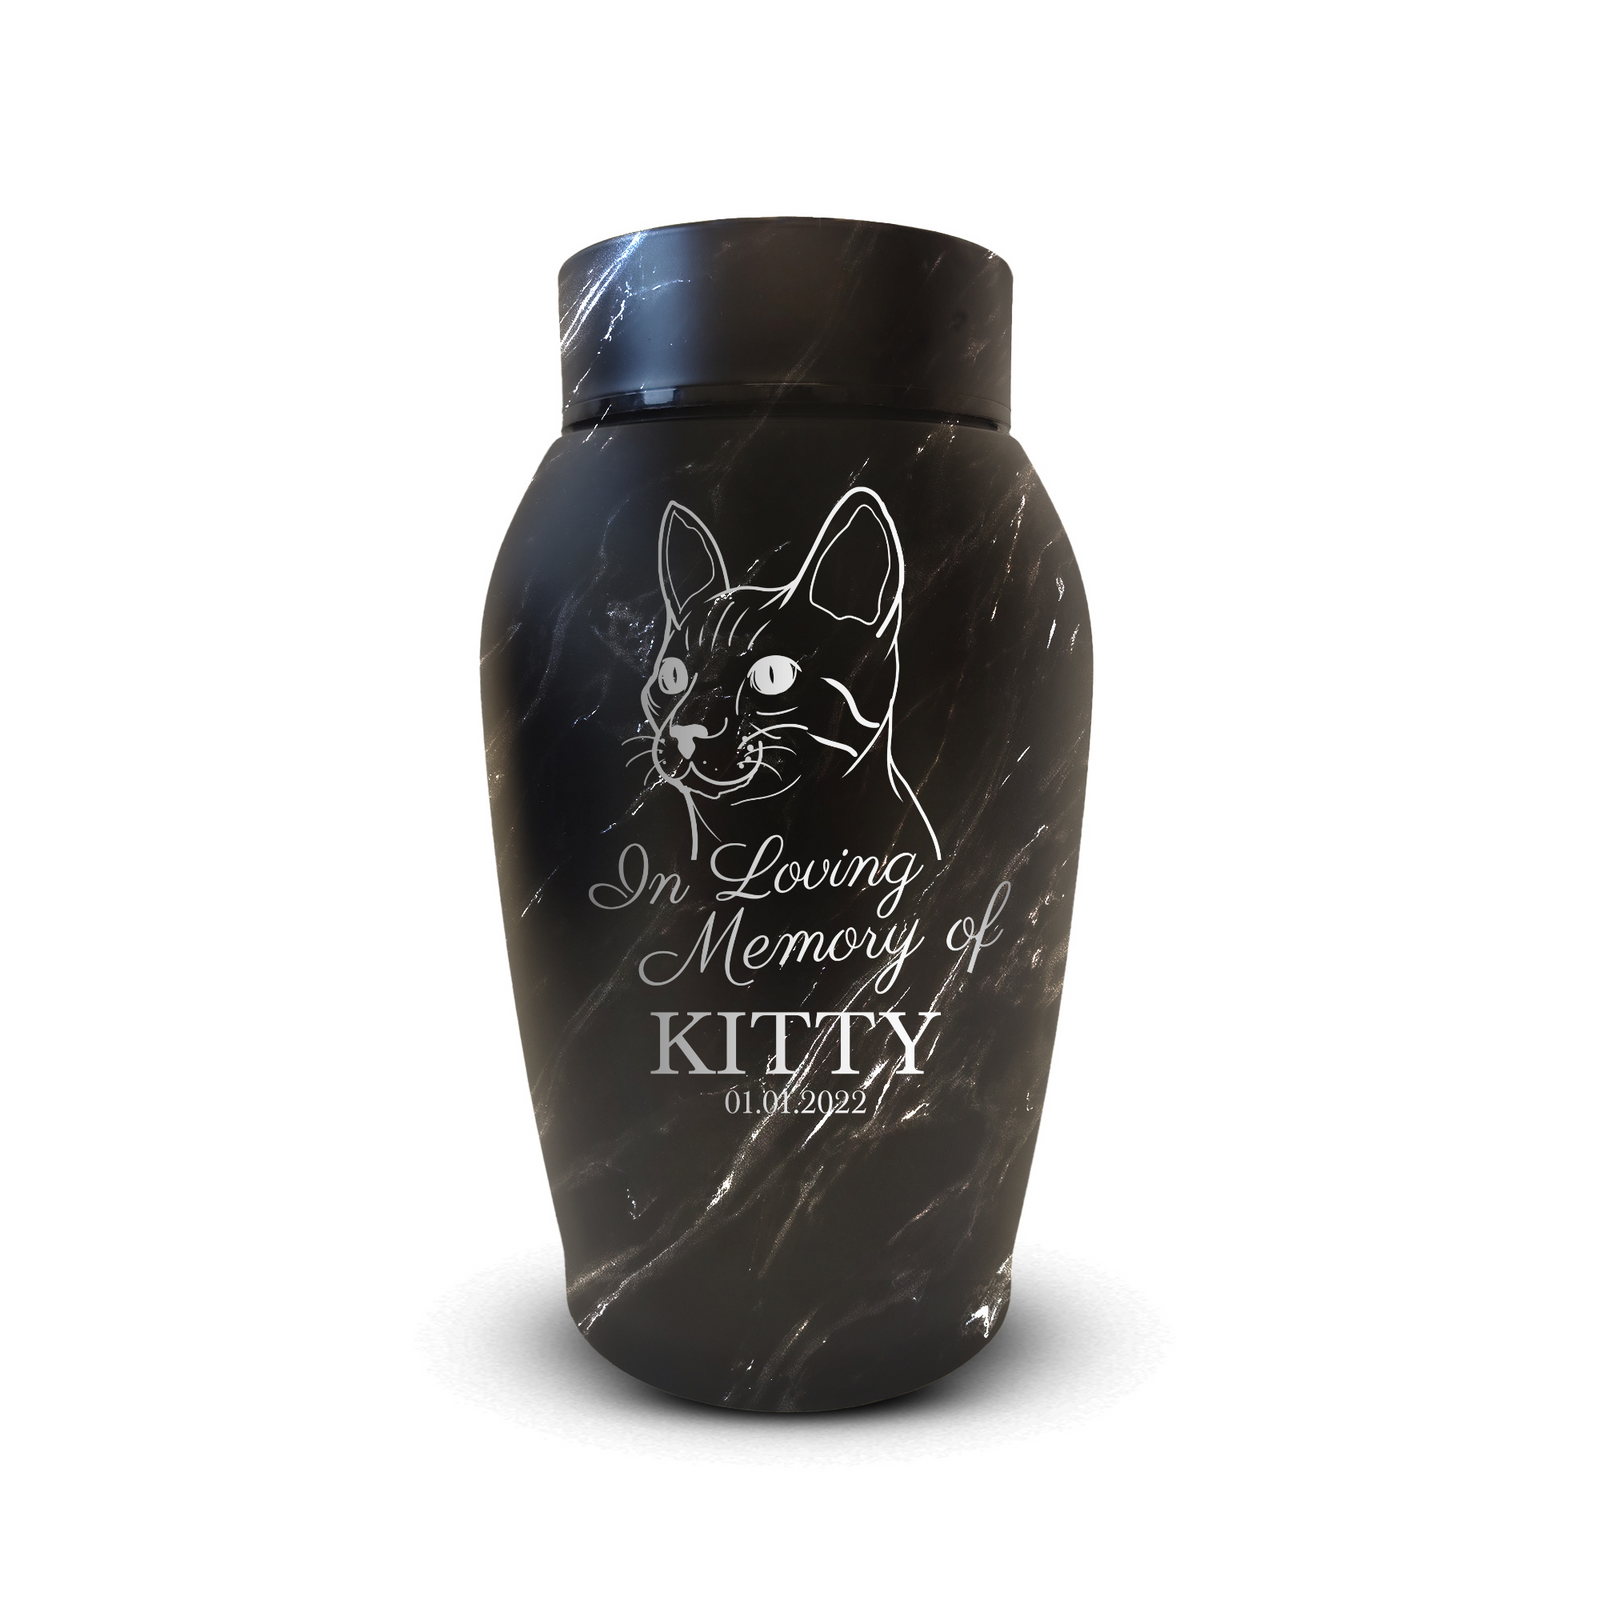 Custom Engraved Pet Urn: Personalized with Your Pet Photo/Image, Name, and Date - Stainless Steel Cremation Urns for Pets Ashes with Airtight Closure, Up to 50 Lbs Capacity | Black Marble 7" x 5"